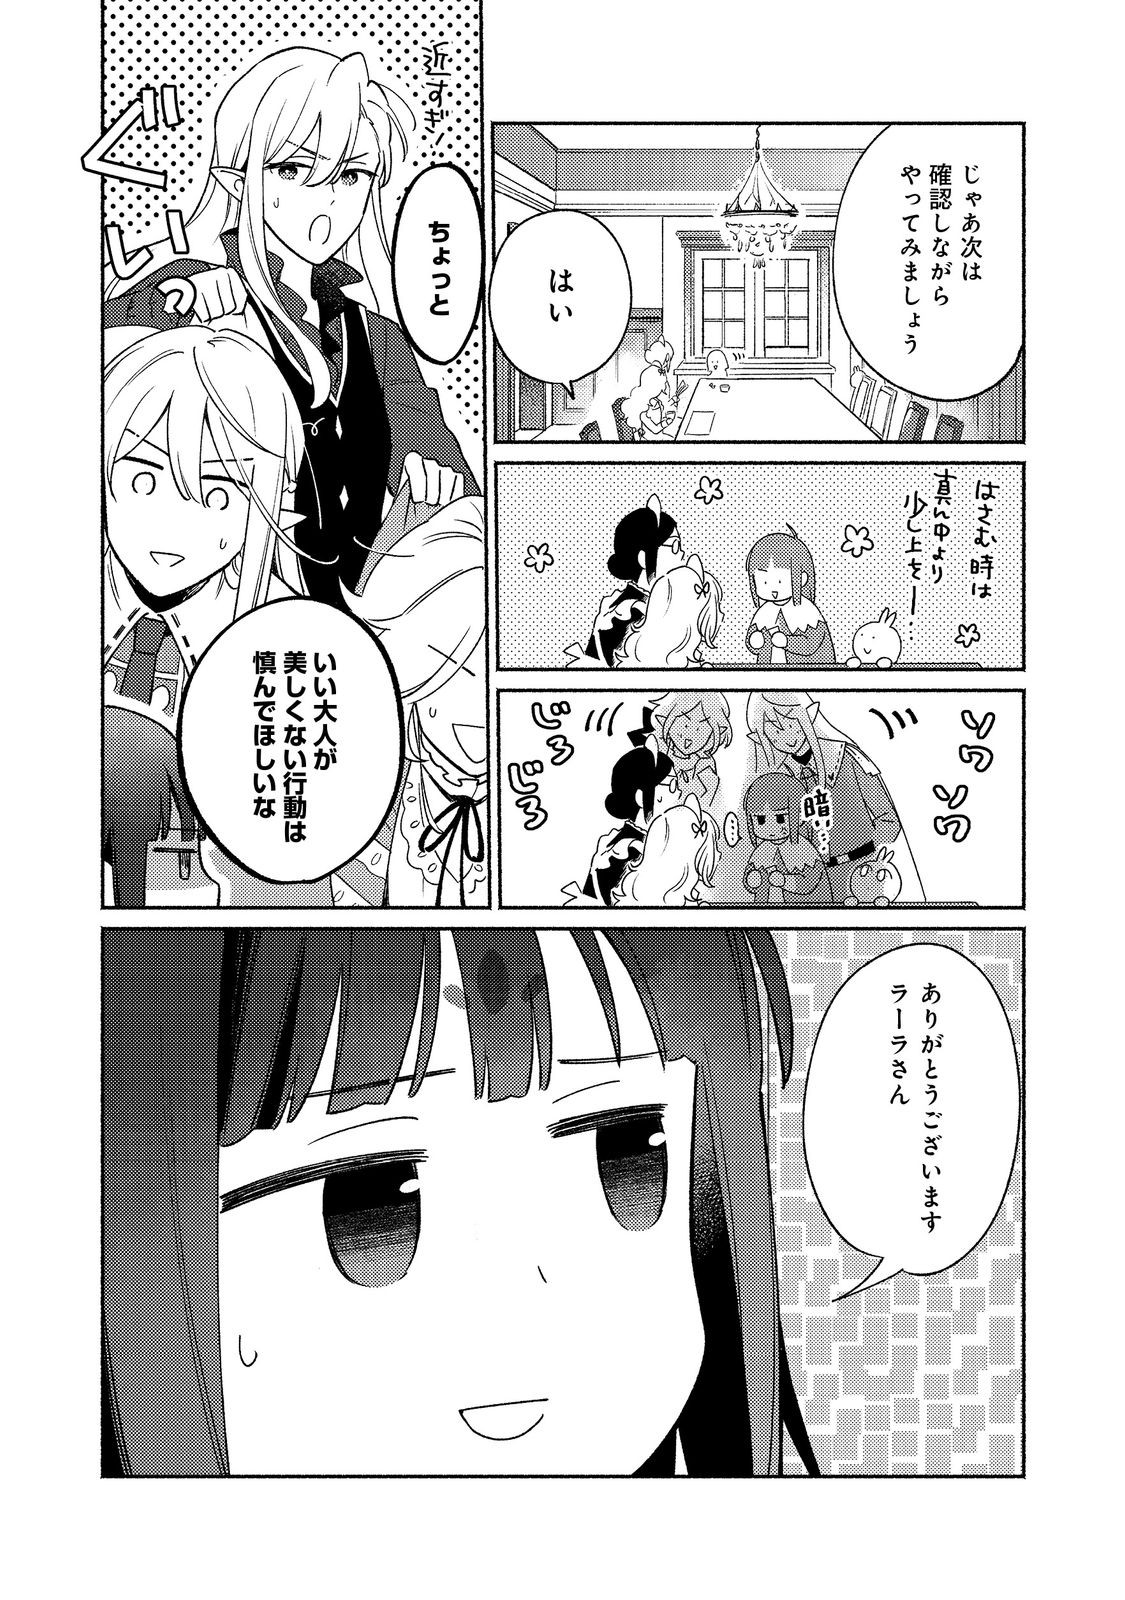 I’m the White Pig Nobleman 第21.1話 - Page 12